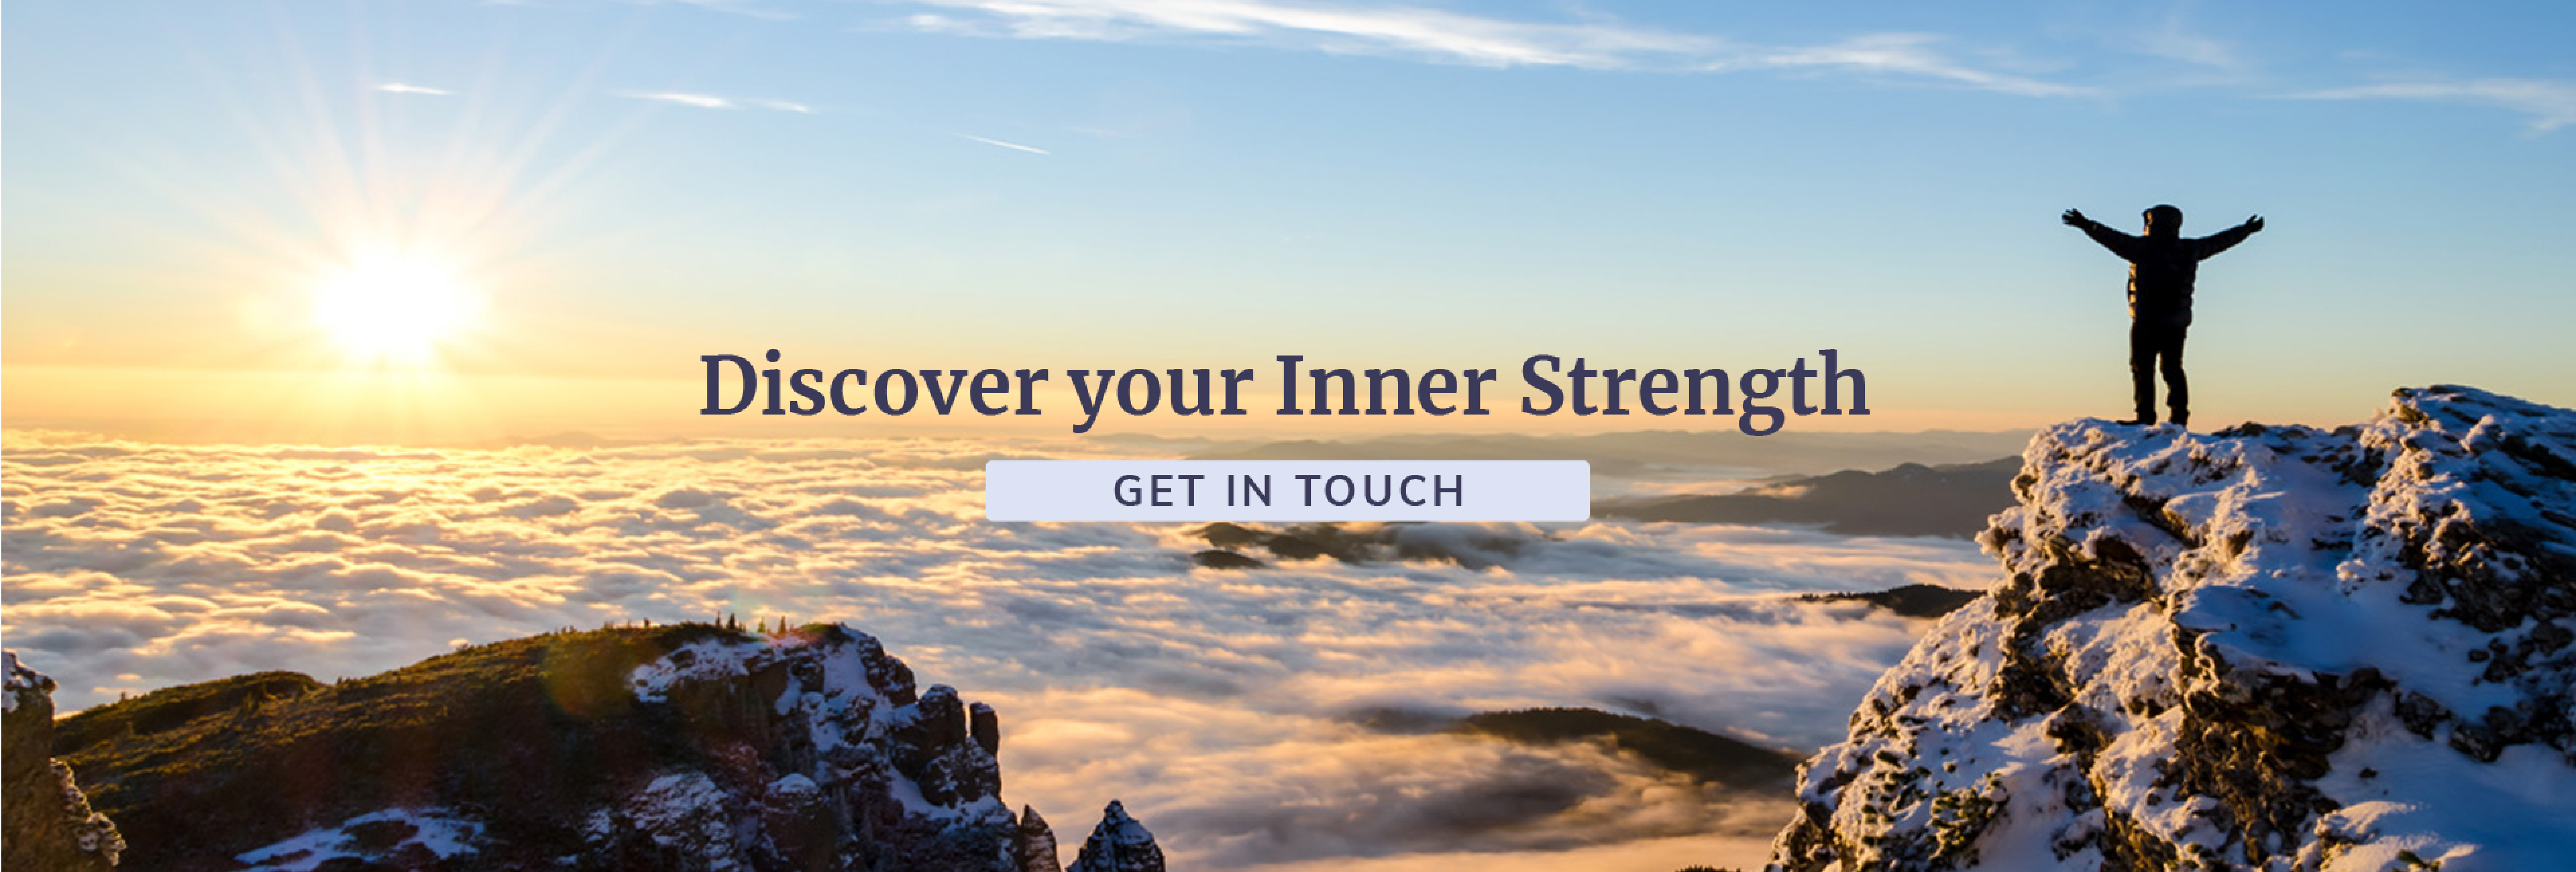 Discover your Inner Strength